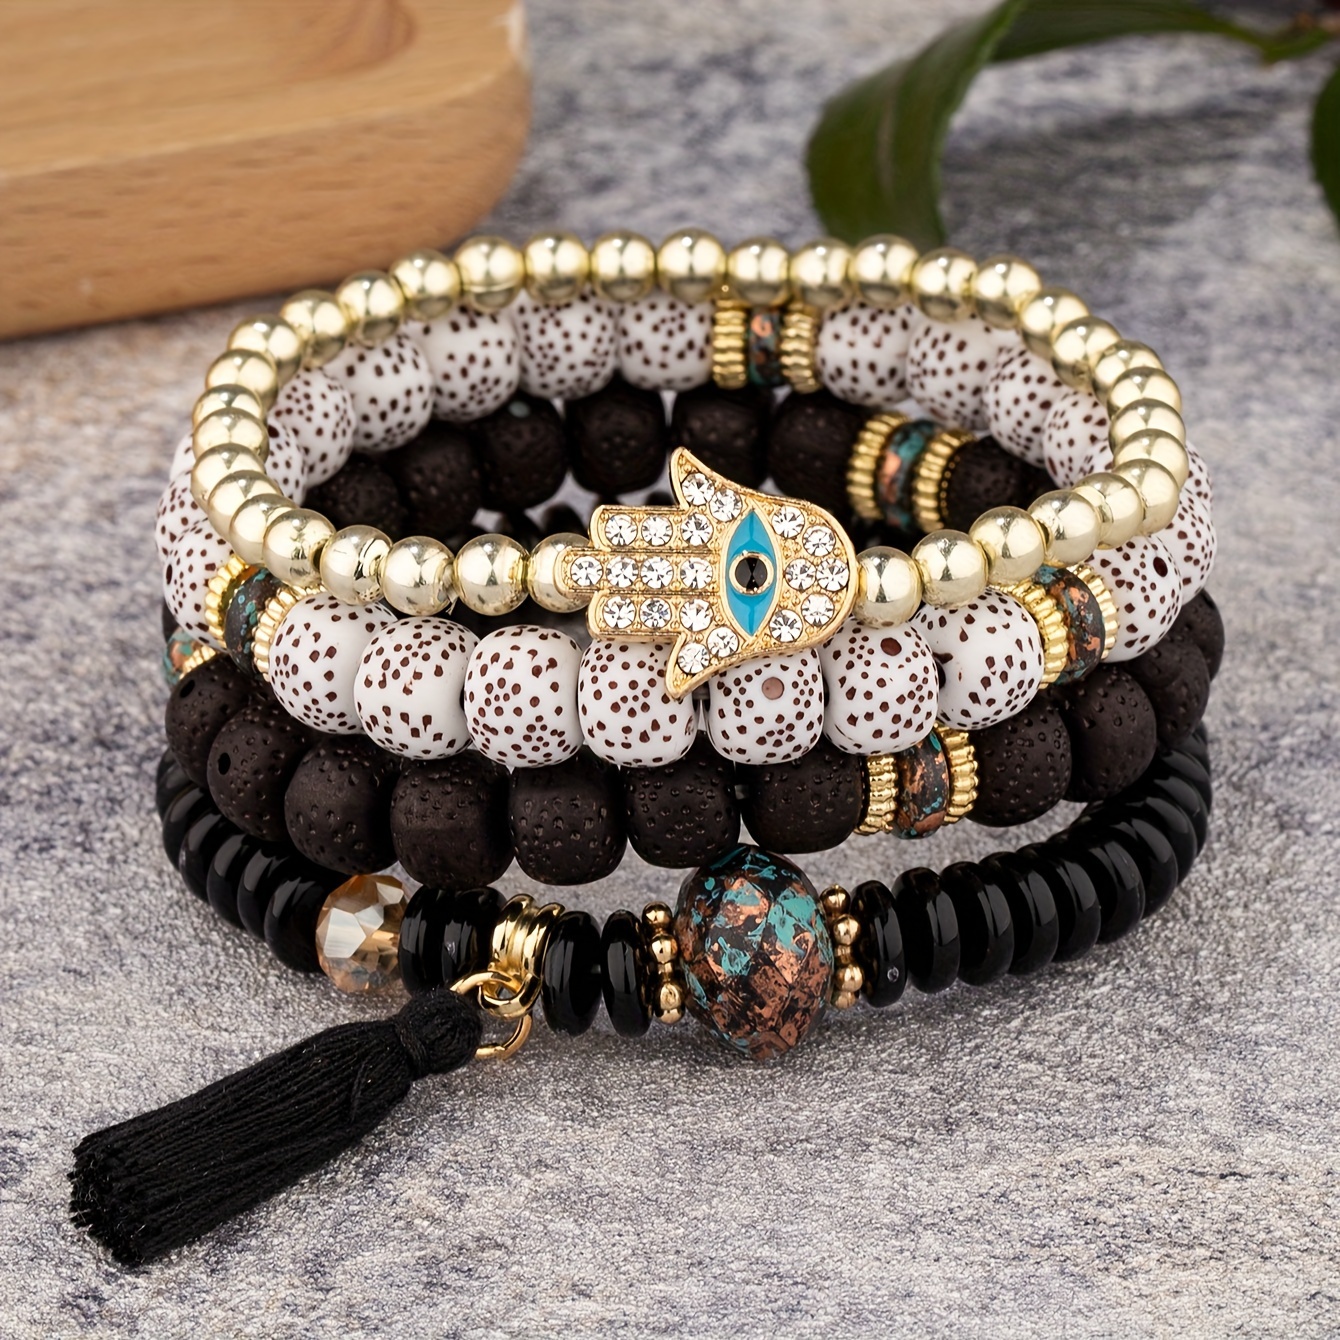 

4pcs Stylish Bracelets Made Of Tiny Beads Multi Colors For U To Choose Trendy Palm Of Hamsa Design Match Daily Outfits Party Accessory